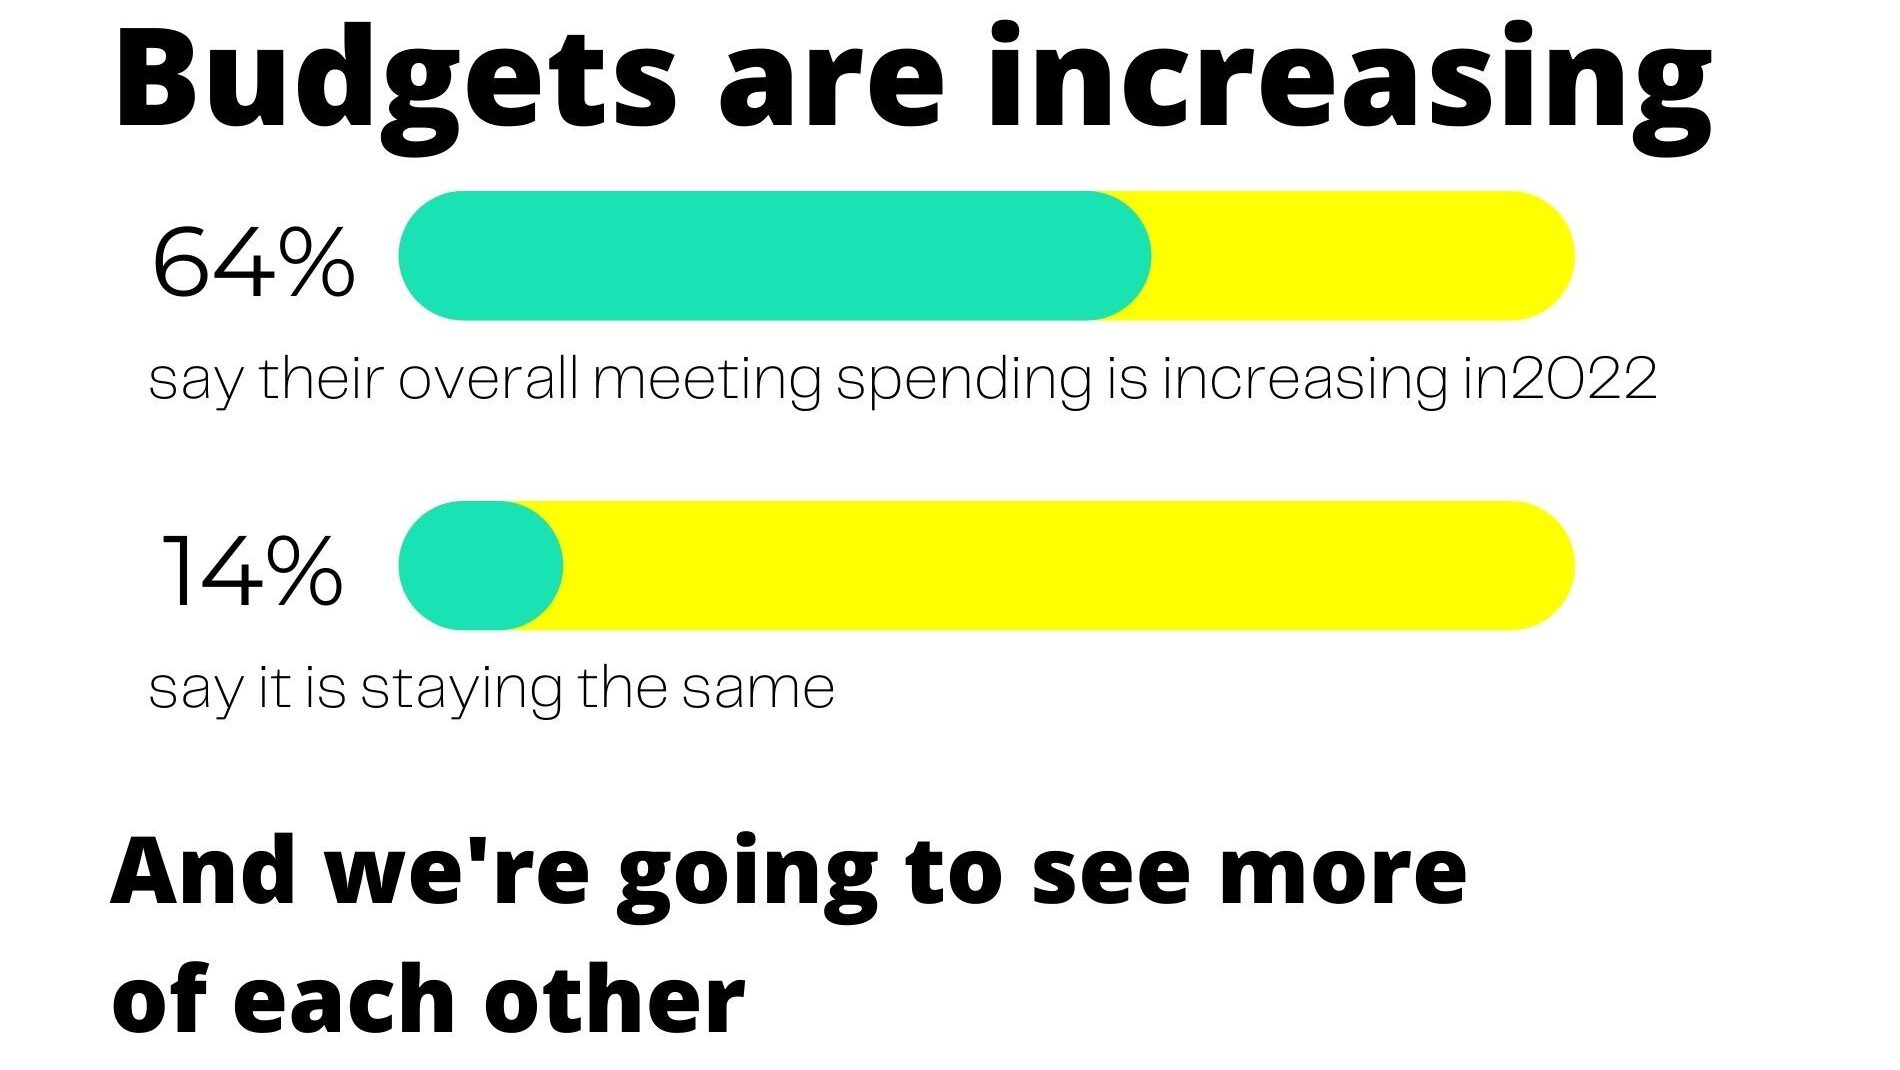 An infographic indicating that budgets are increasing (64% say their overall meeting spending is increasing in 2022, and 14% say it is staying the same). At the bottom it says "and we're going to see more of each other"